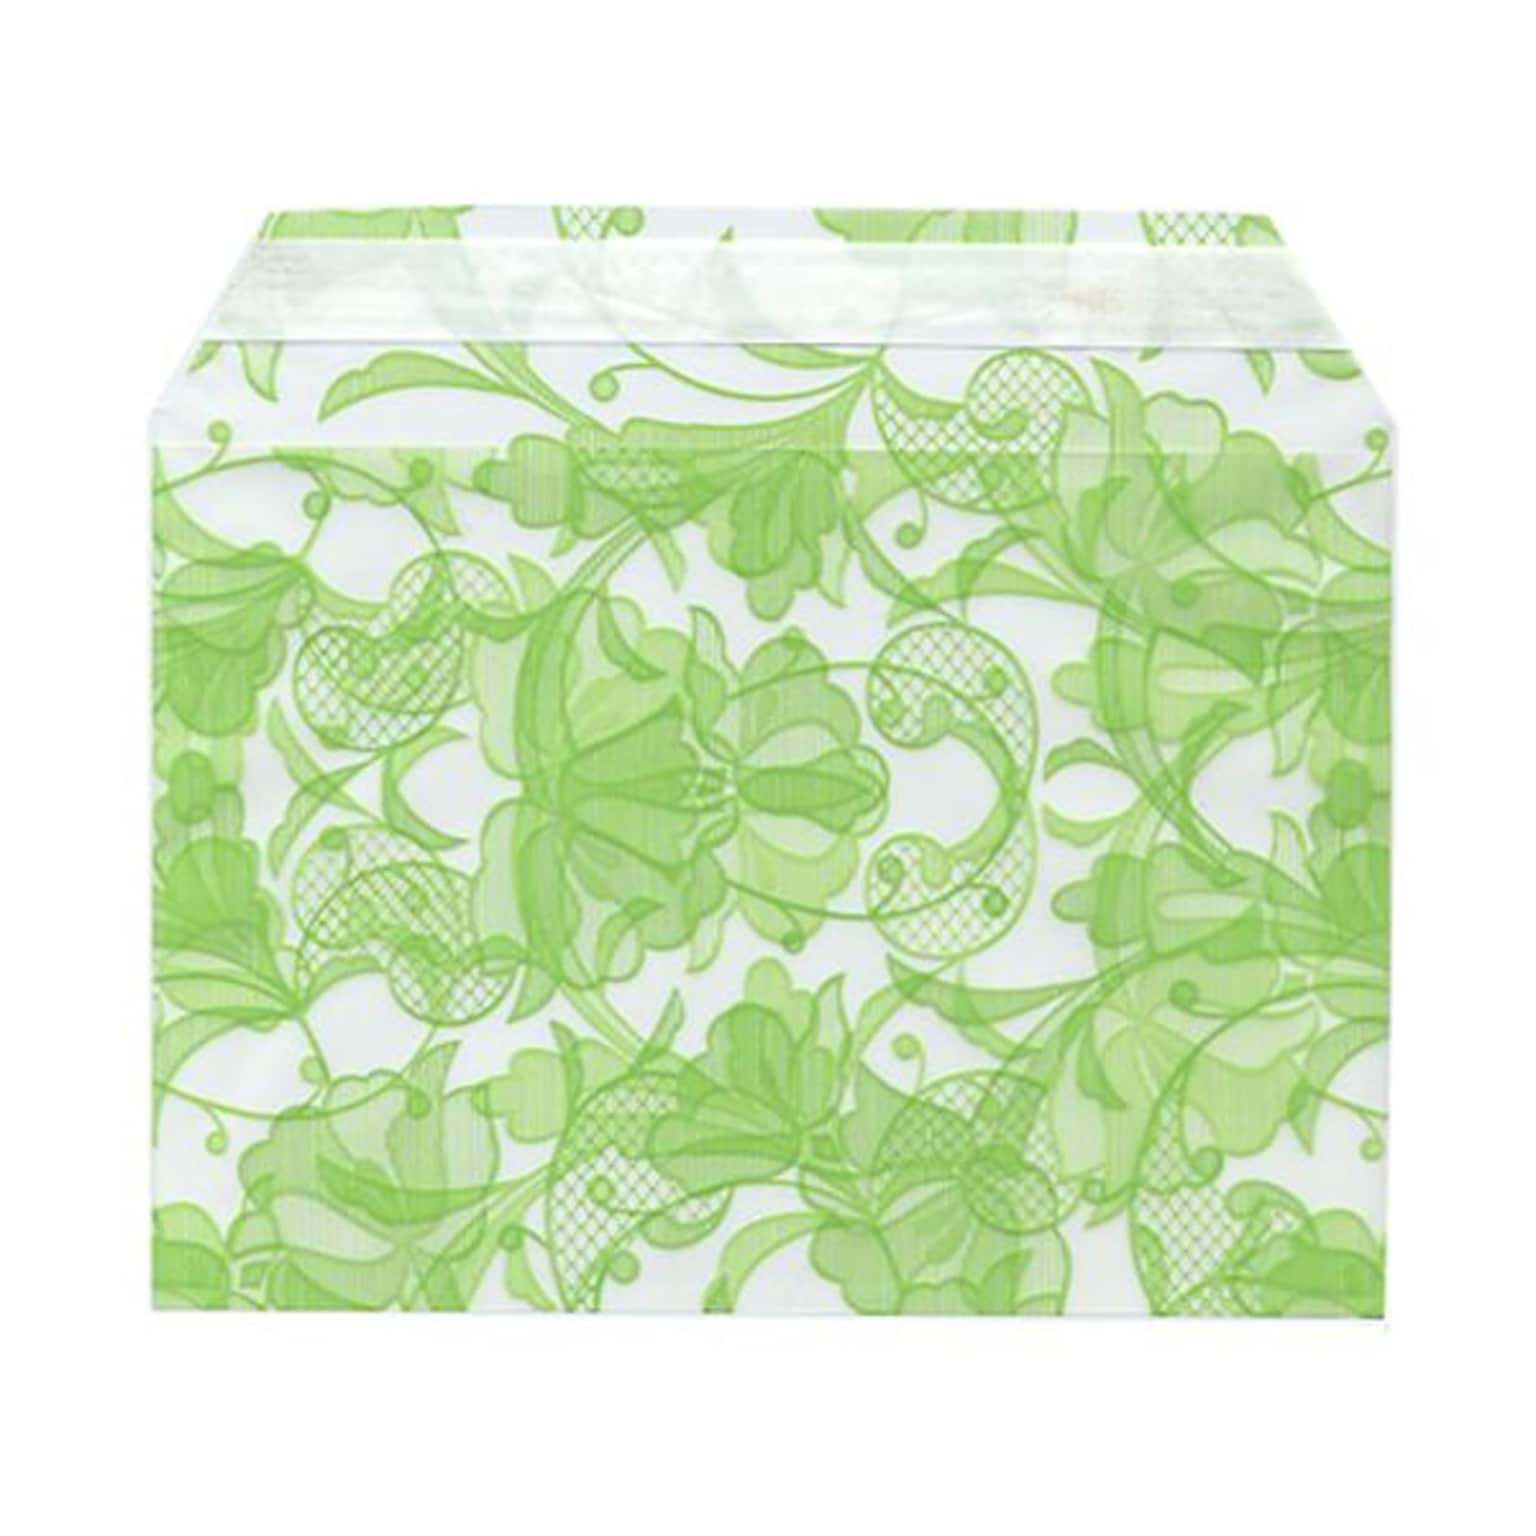 JAM Paper Cello Sleeves with Peel & Seal Closure, 5.0625 x 7.1875, Green Lace, 100/Pack (2785507)